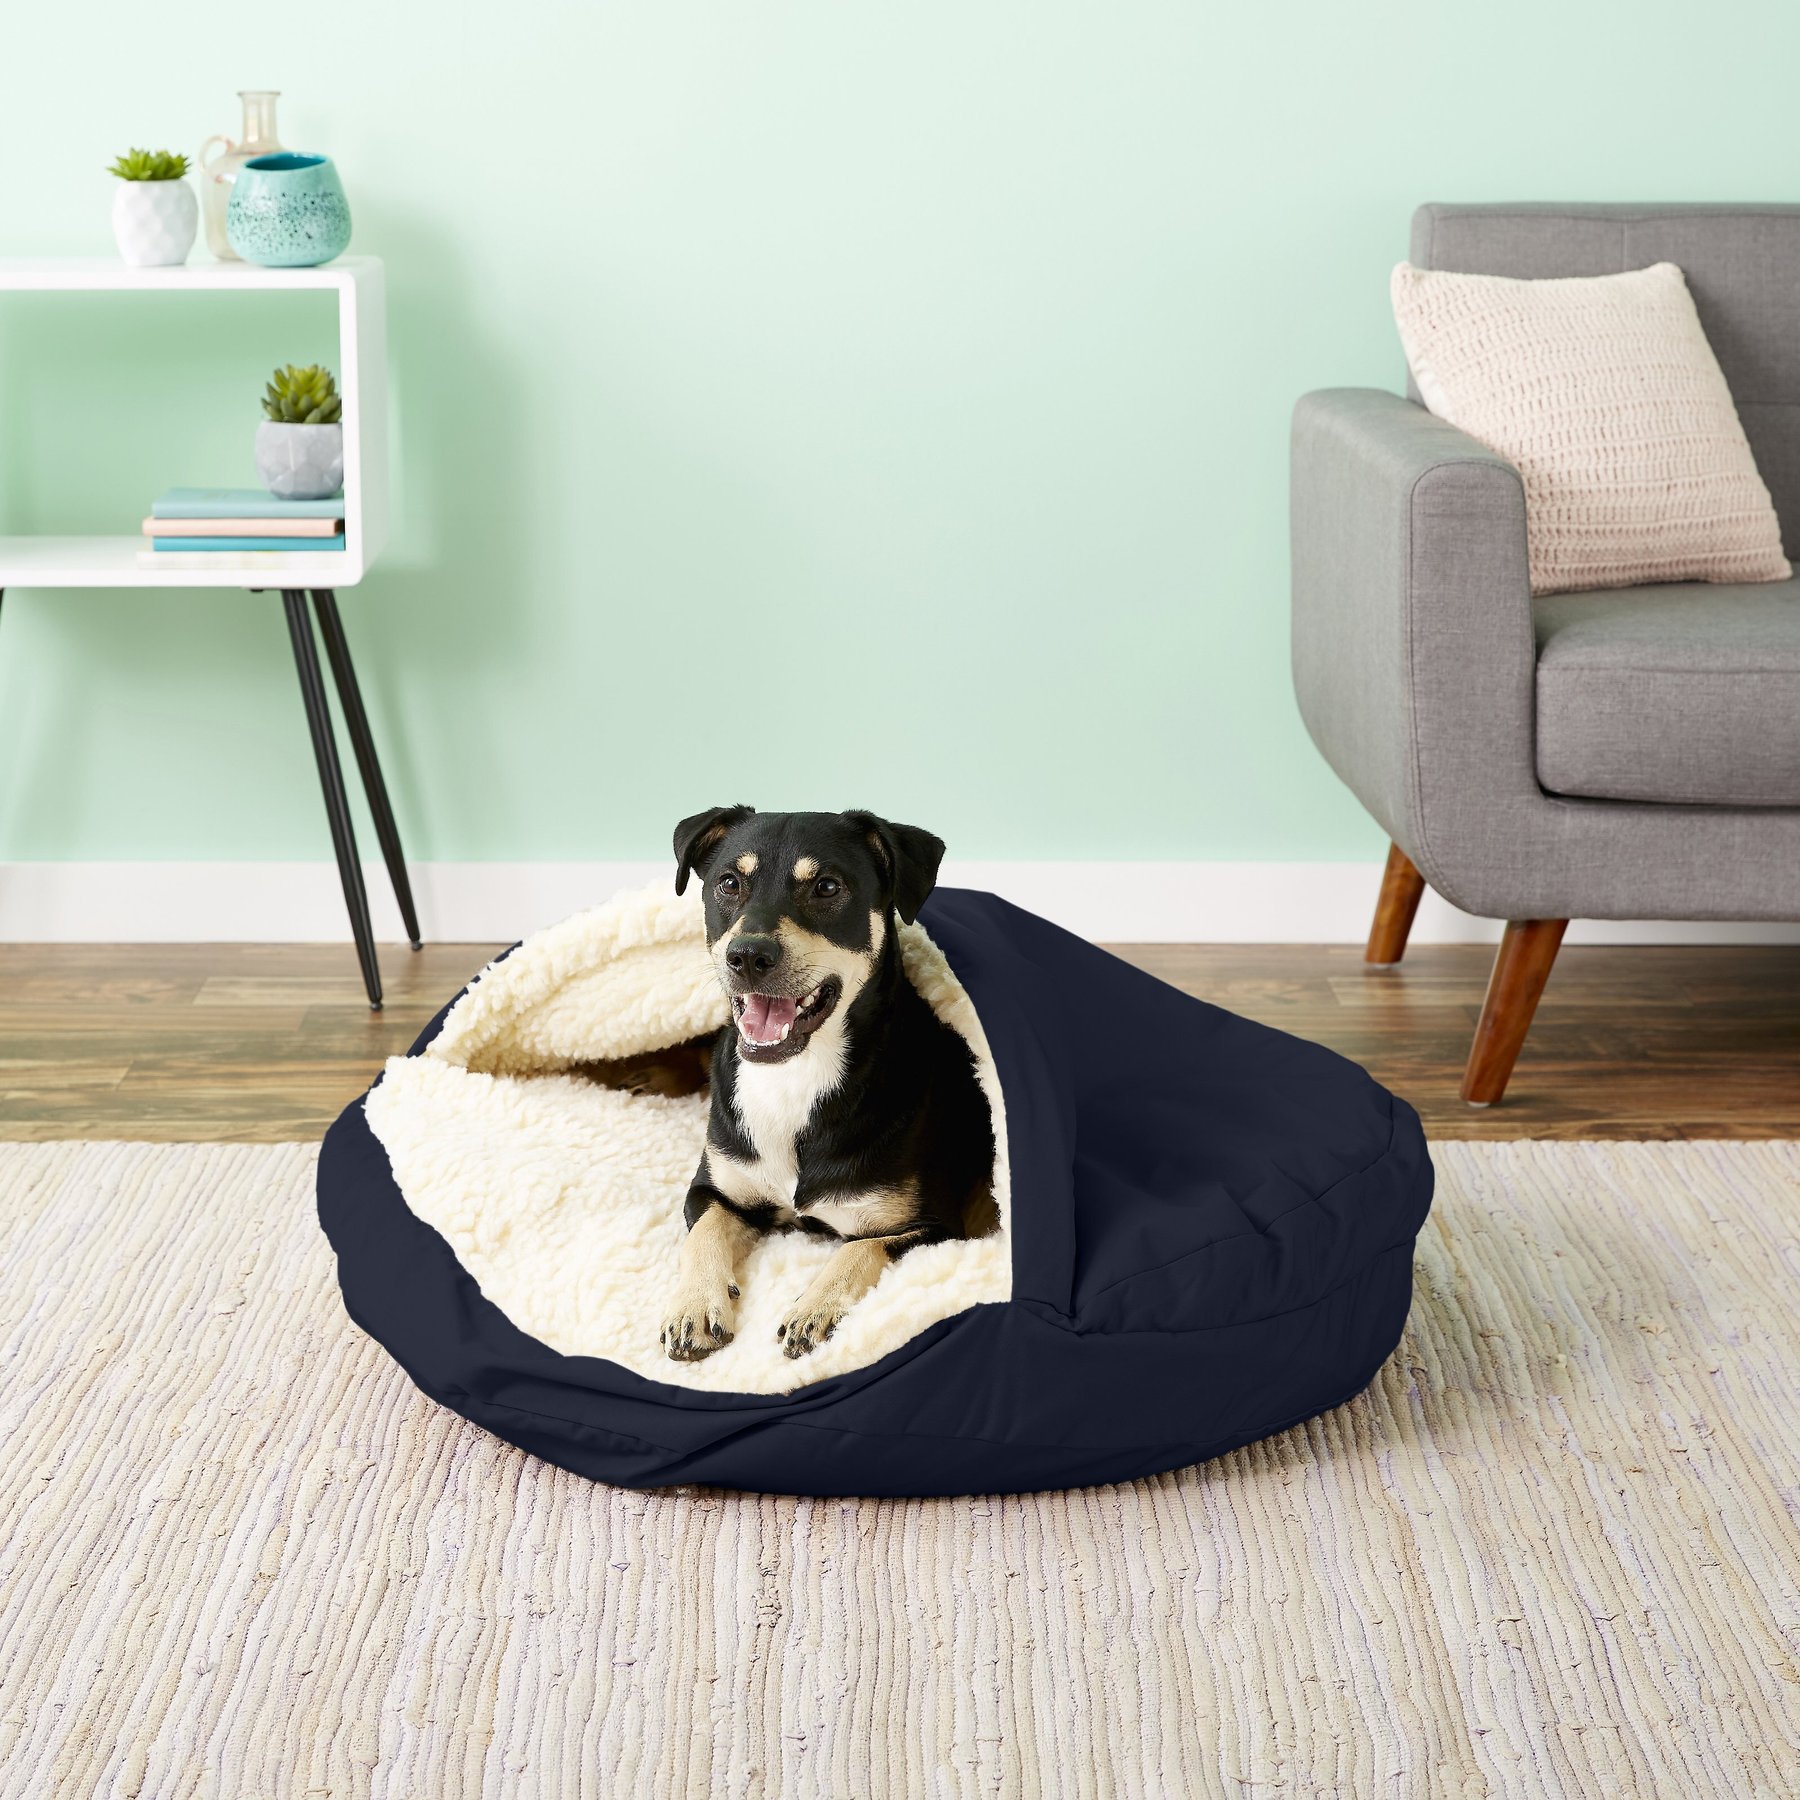 Should you put a bed in your dog's crate? - Snoozer Pet Products